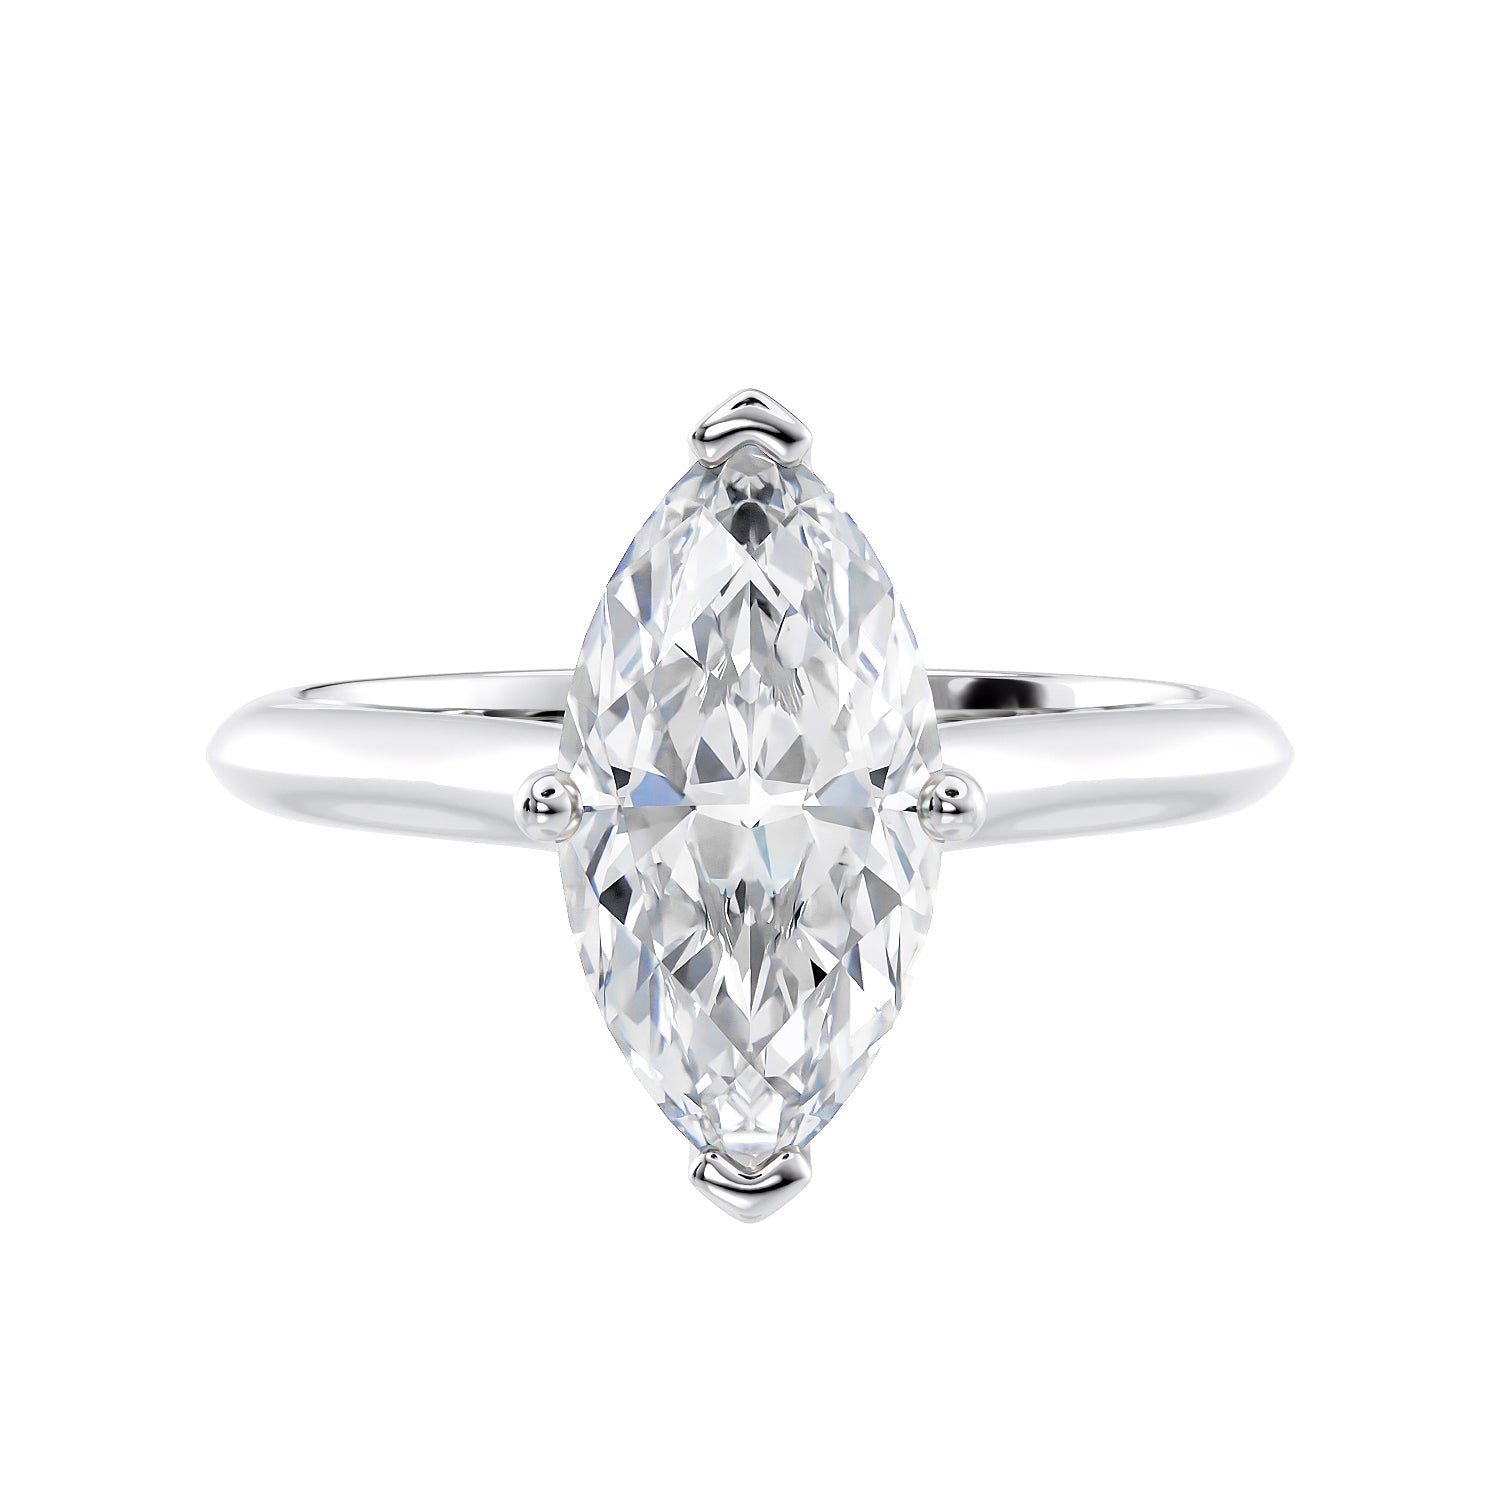 Marquise cut solitaire diamond engagement ring white gold front view.